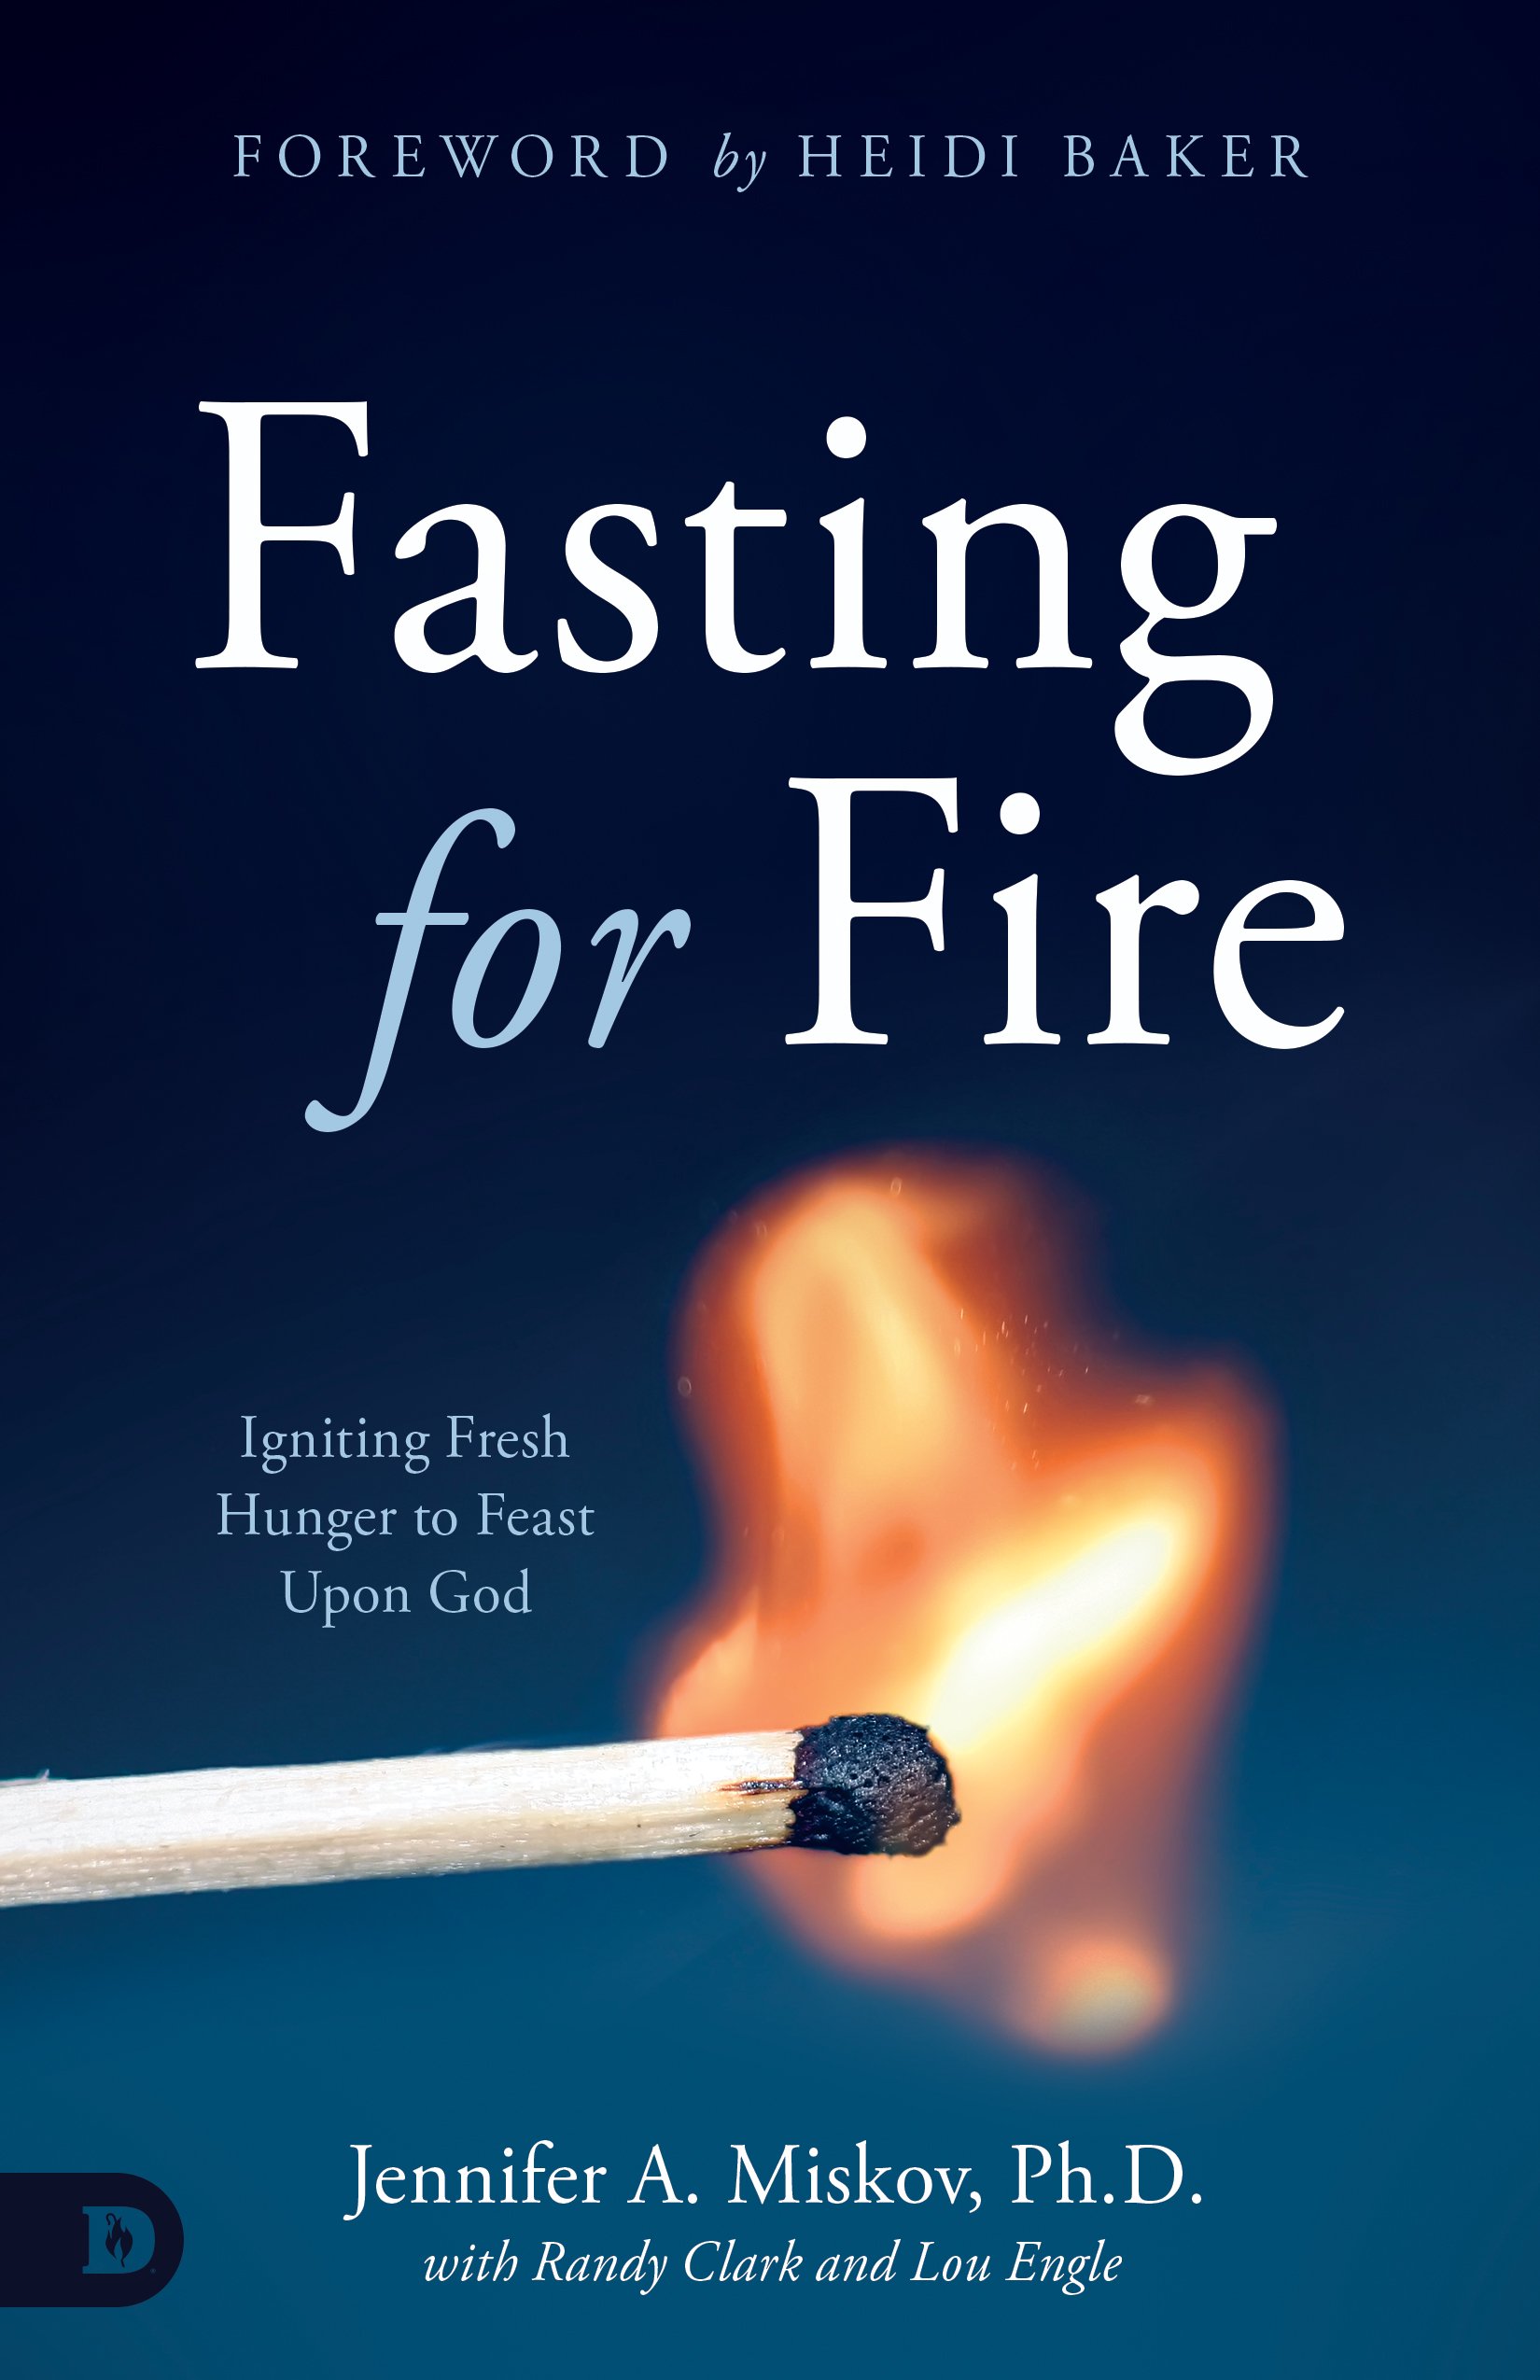 Fasting_for_Fire_FINALFRONTCOVER.jpg